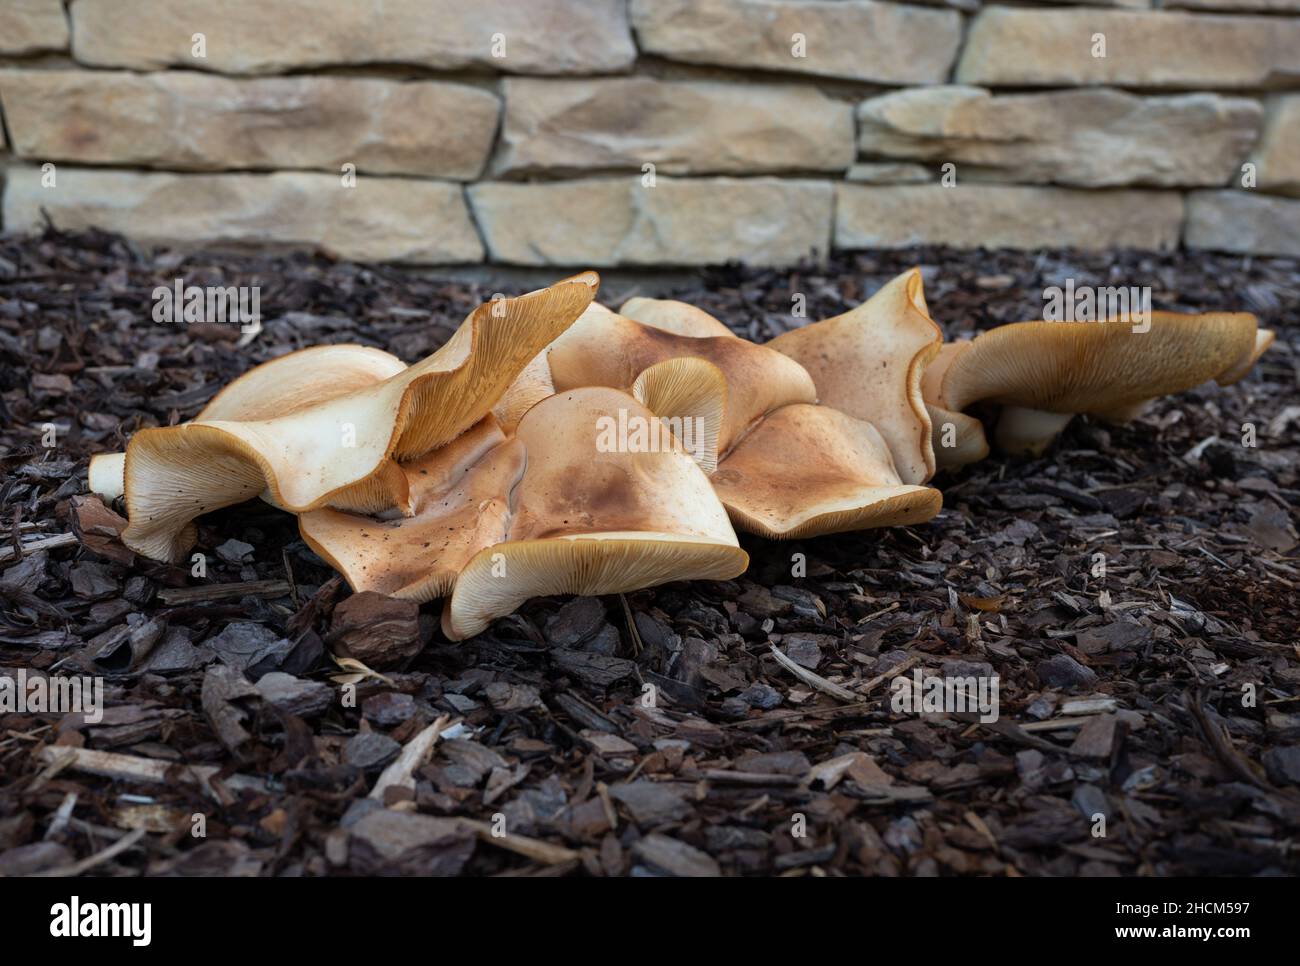 Closeup of fairy ring mushrooms growing on the ground in front of a brick wall Stock Photo